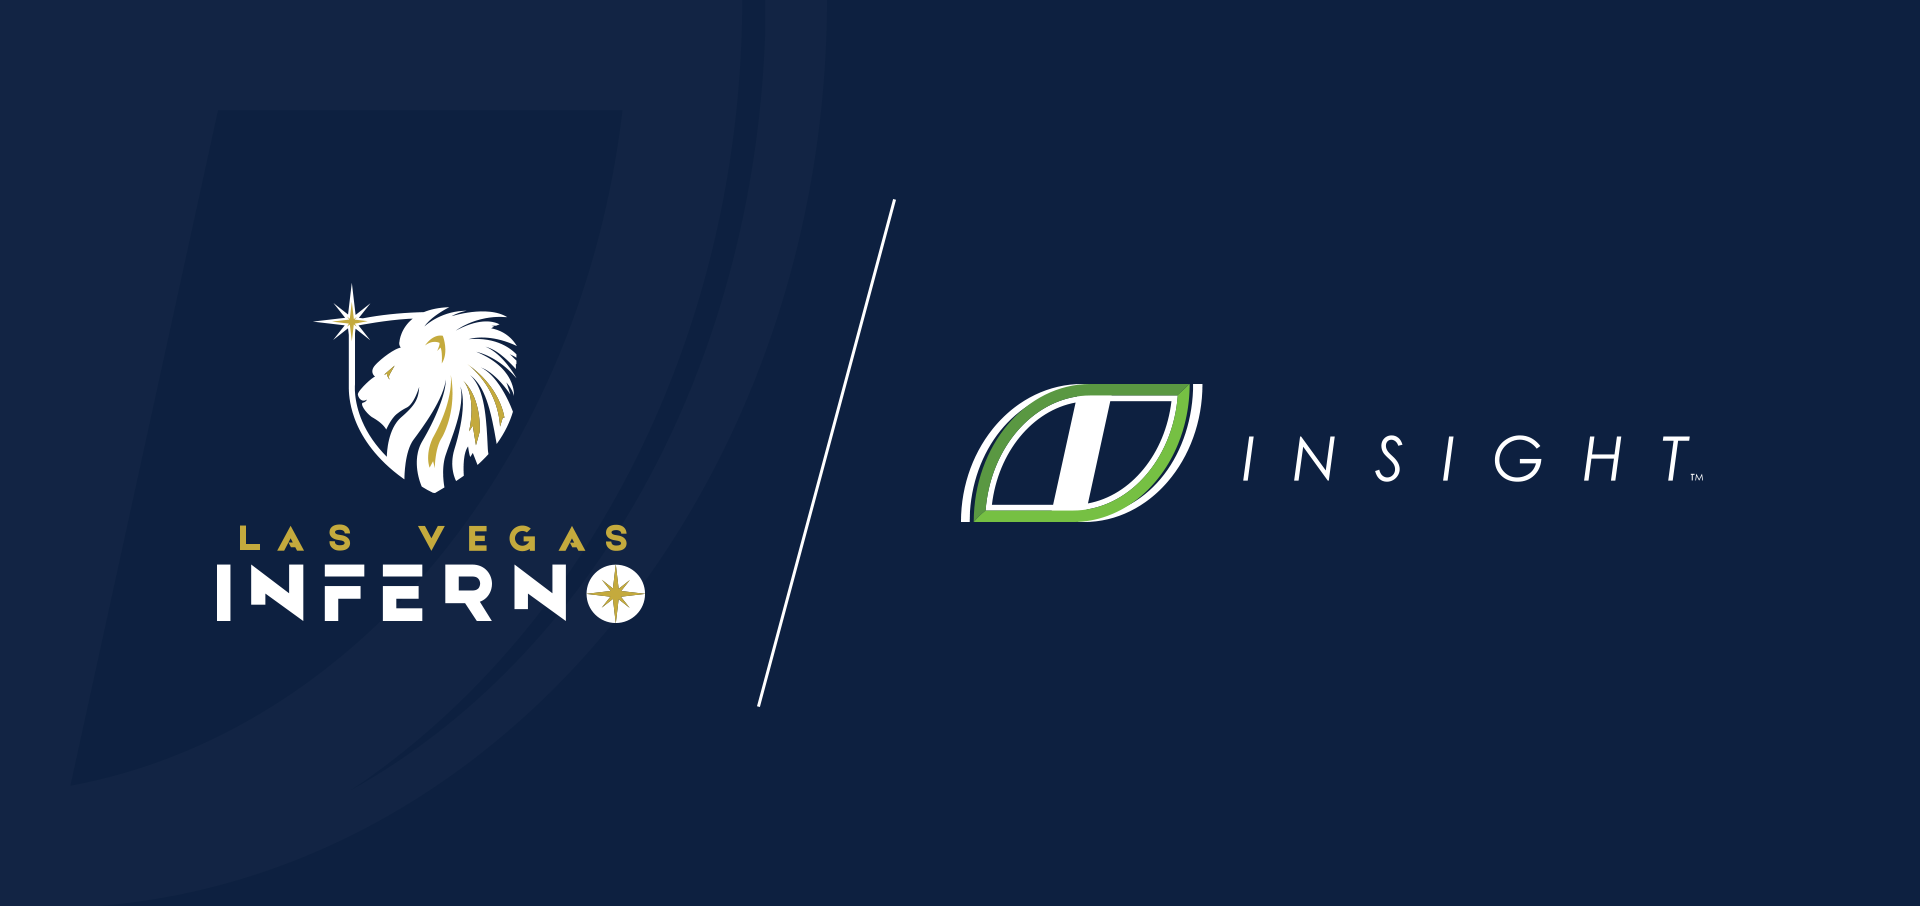 Las Vegas Inferno Signs Partnership Agreement with Apparel Provider Insight